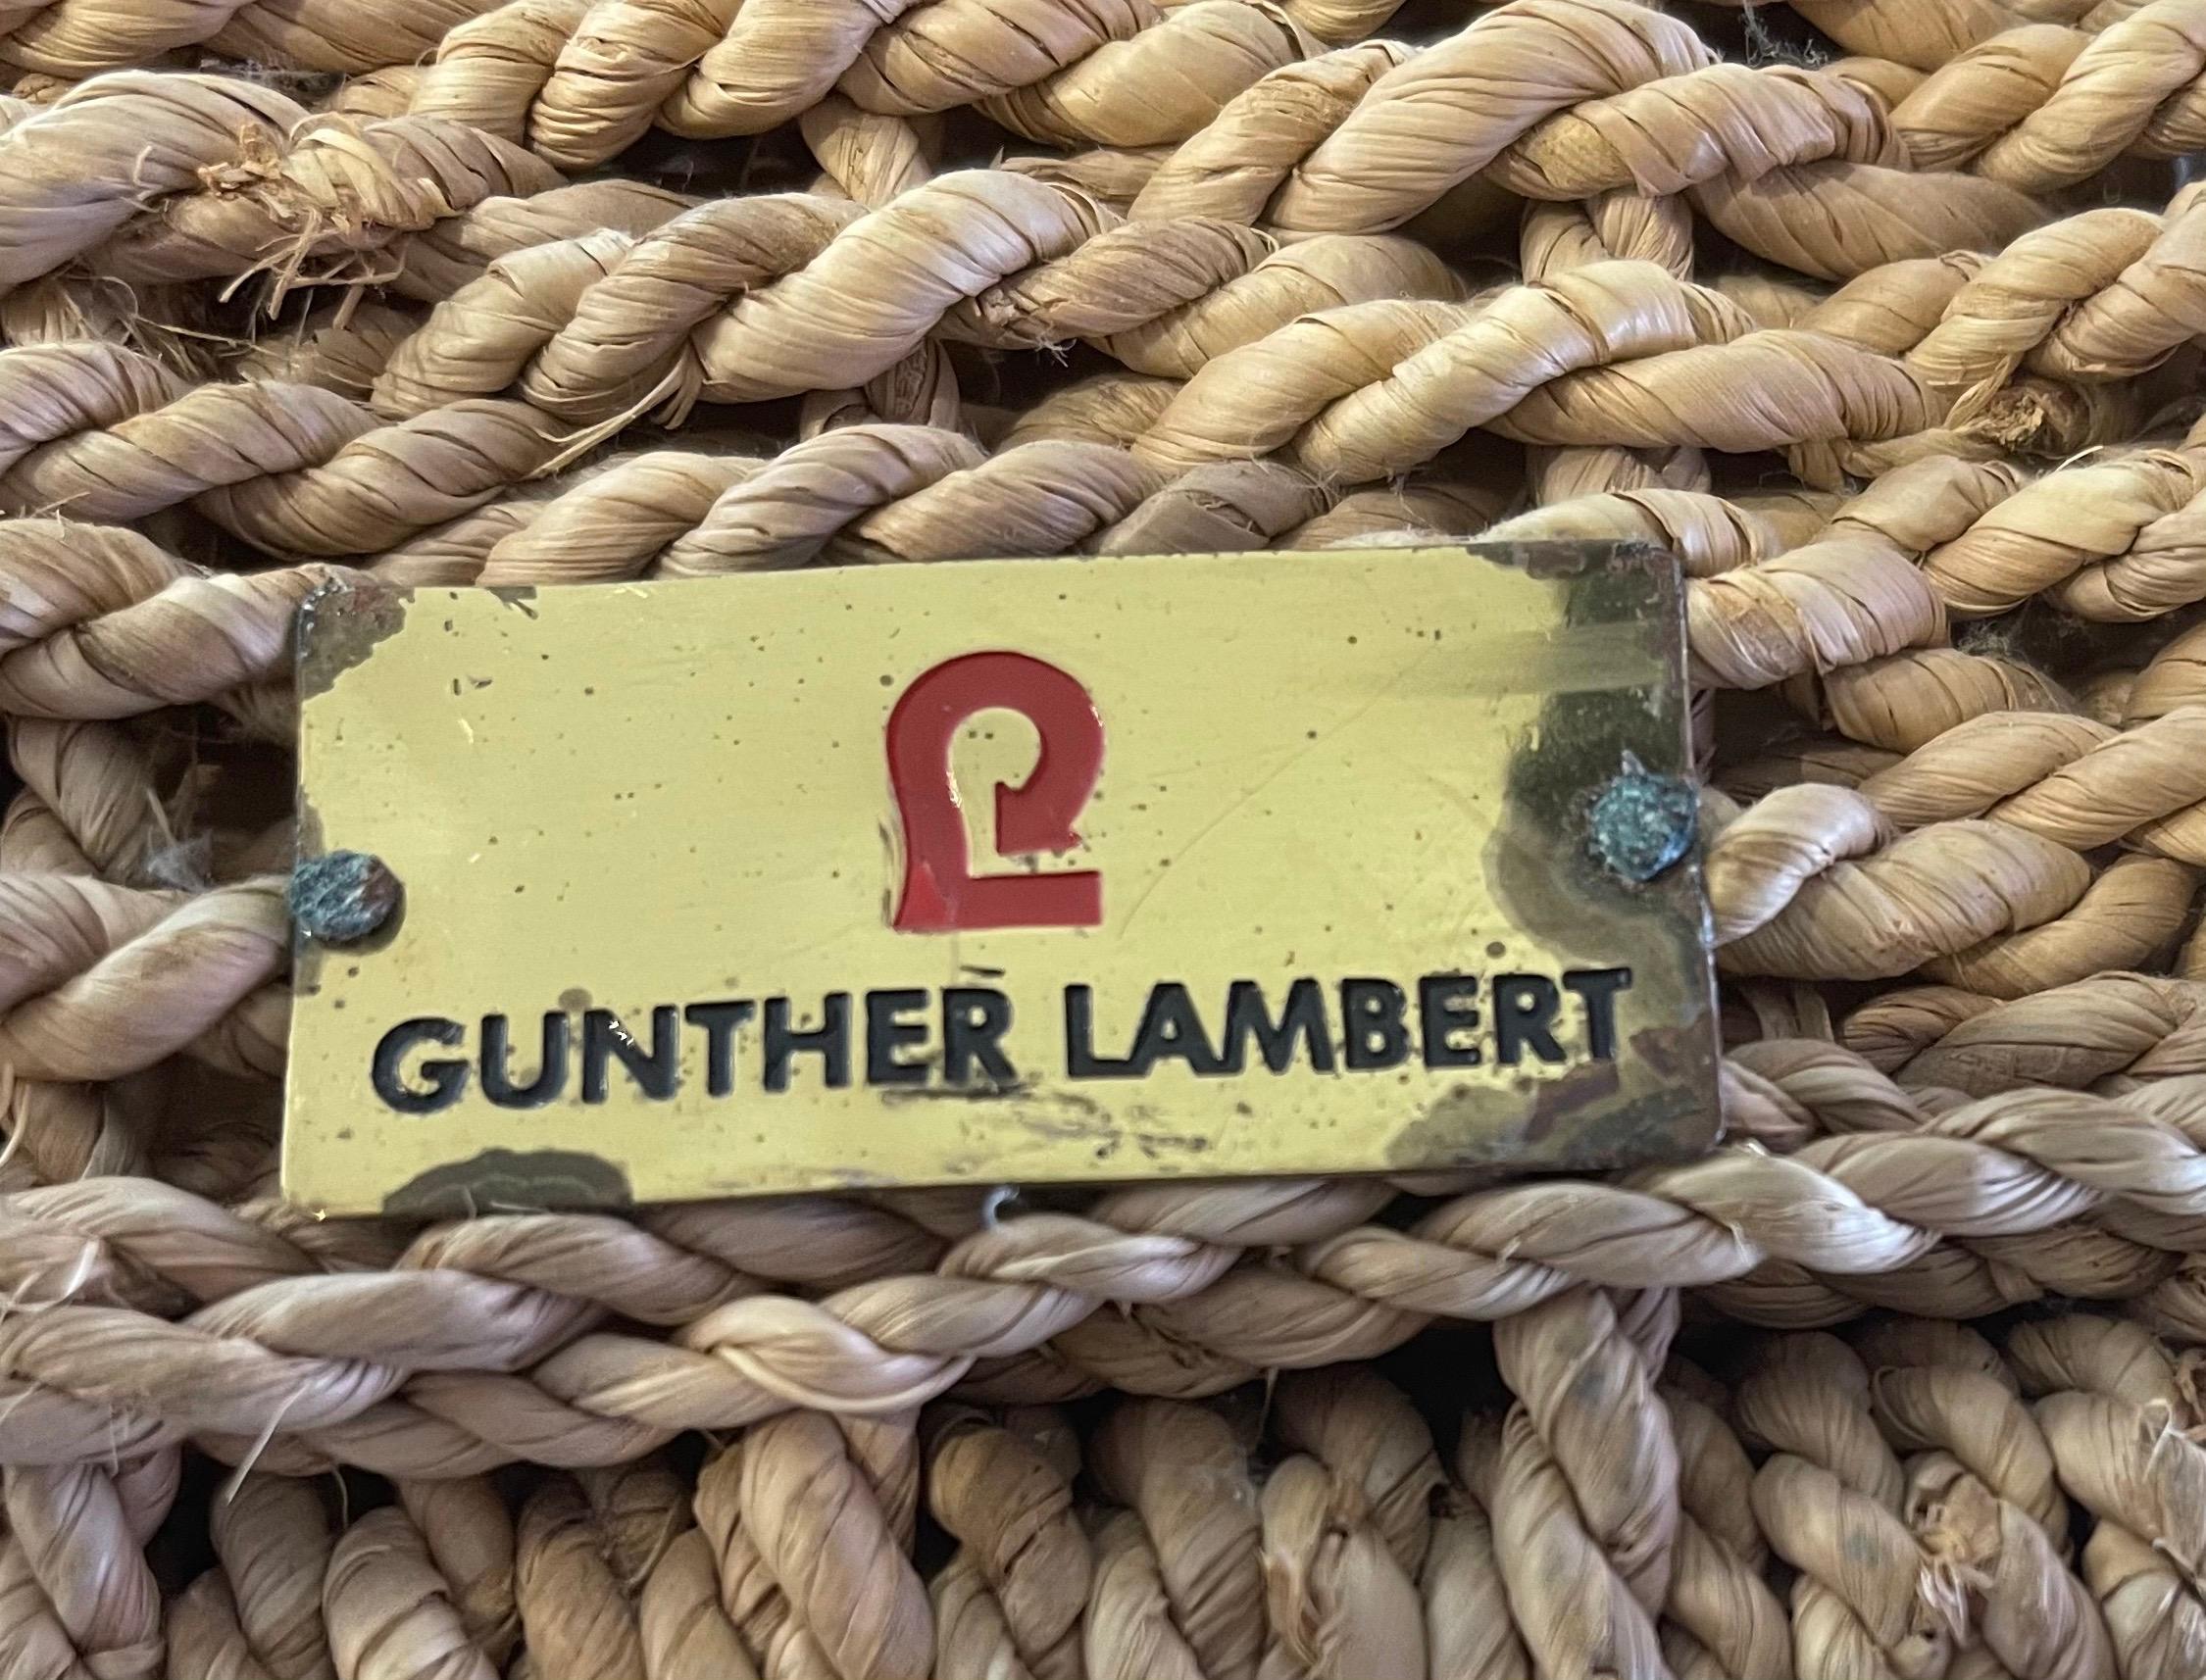 Hand Woven Rope Basket / Magazine Holder by Gunther Lambert In Good Condition For Sale In San Diego, CA